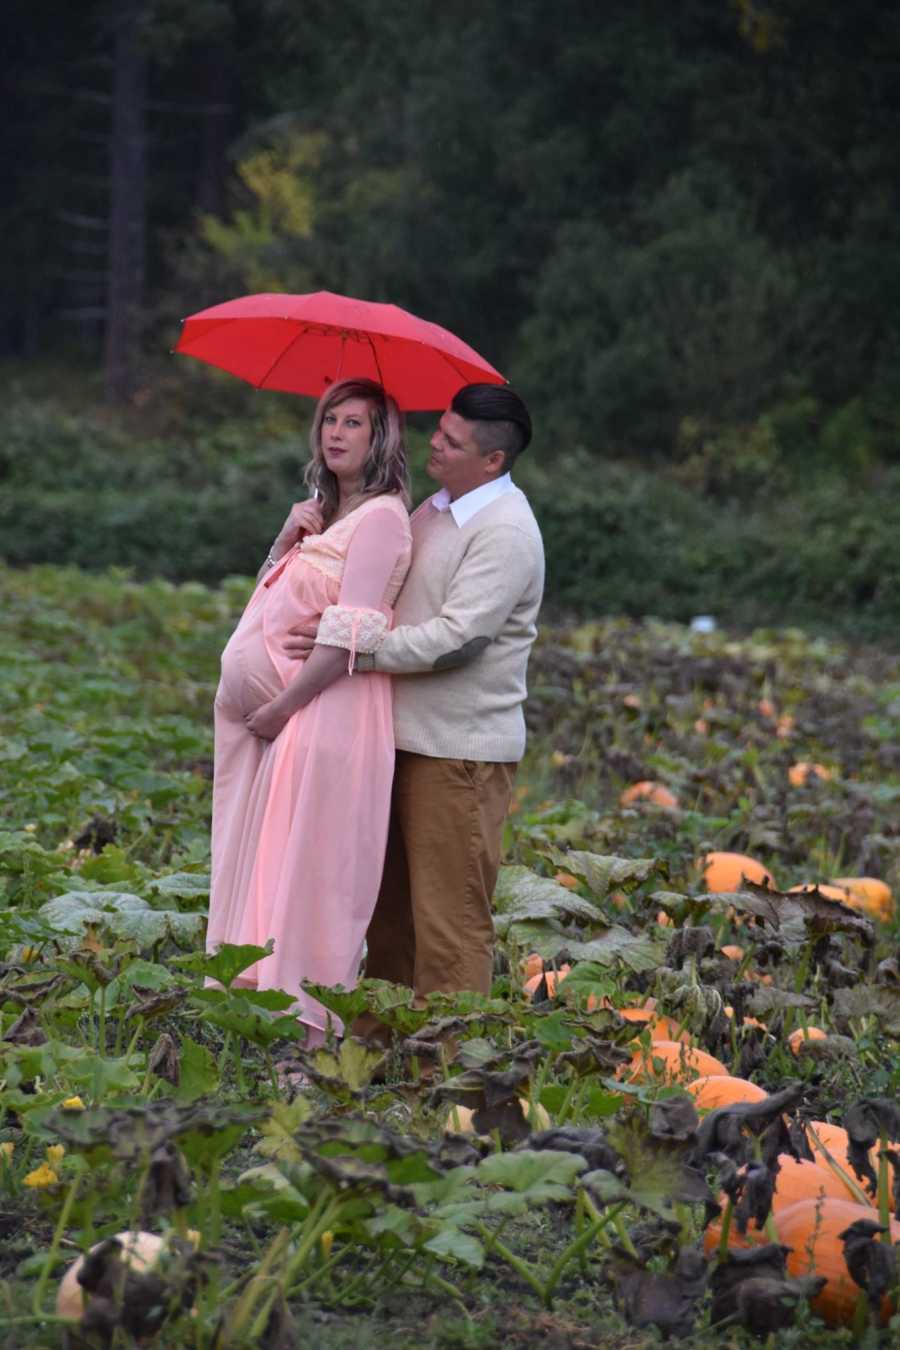 Pregnant woman stands holding umbrella in pumpkin patch with husband holding her from behind